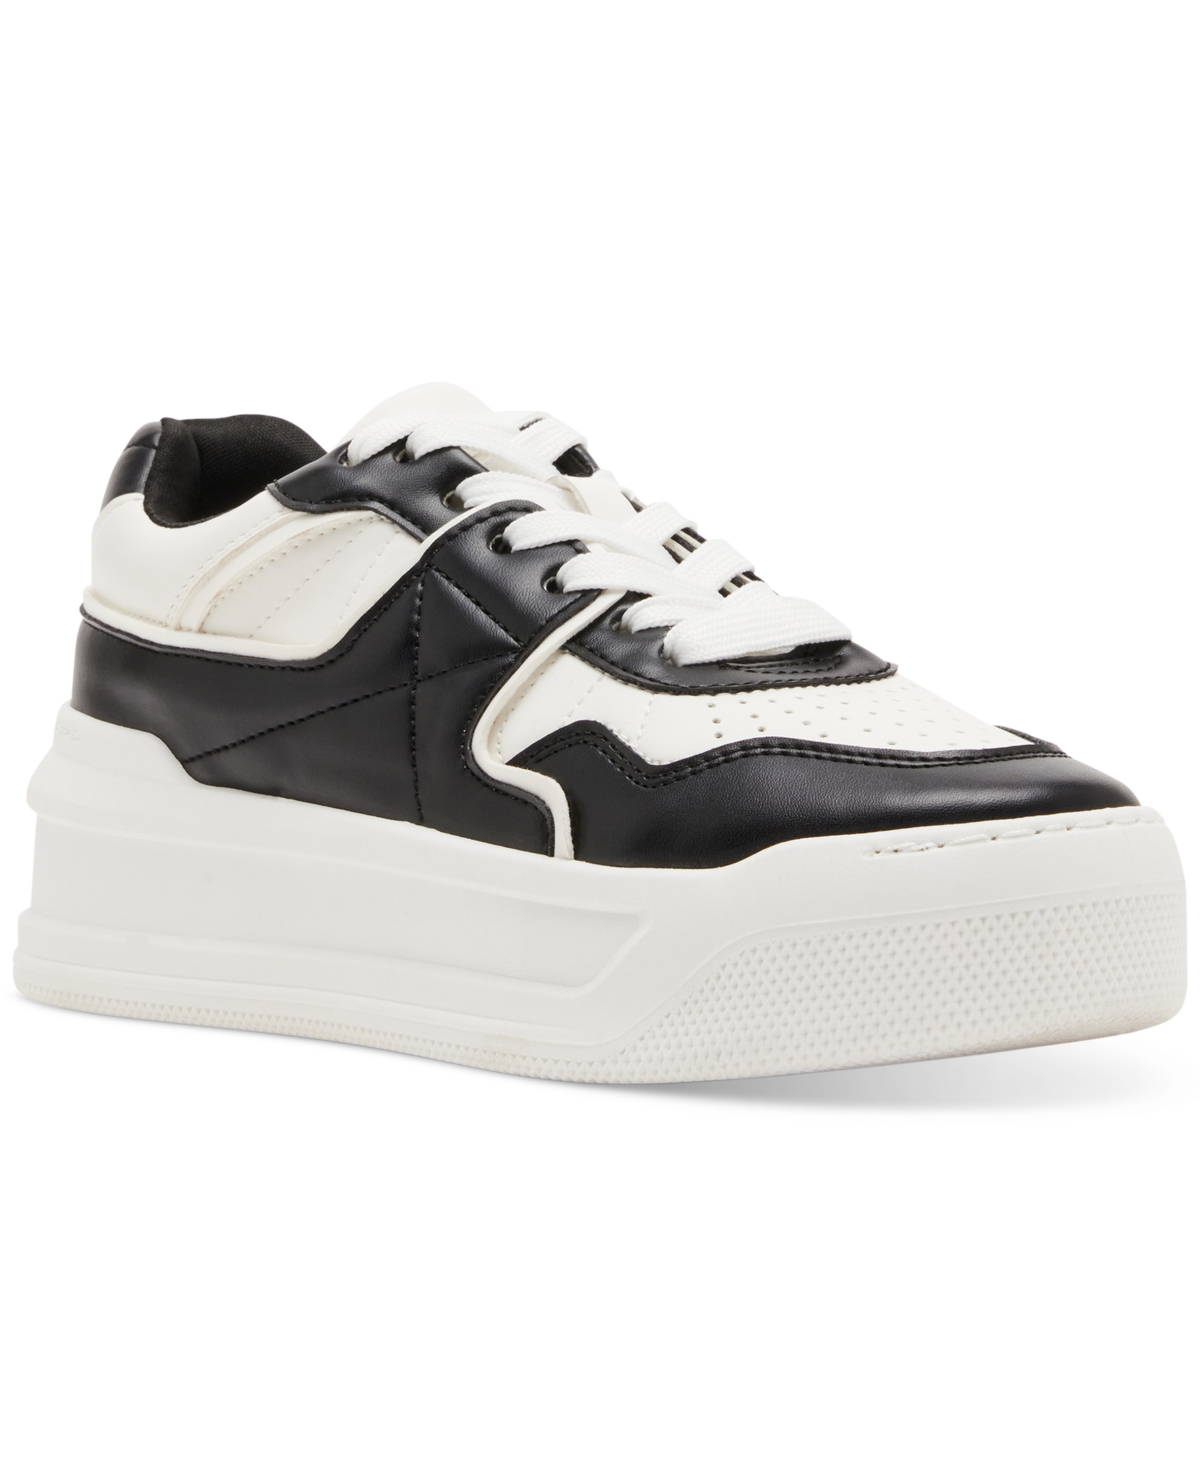 Oley Lace-Up Platform Court Sneakers - White/Denim Multi